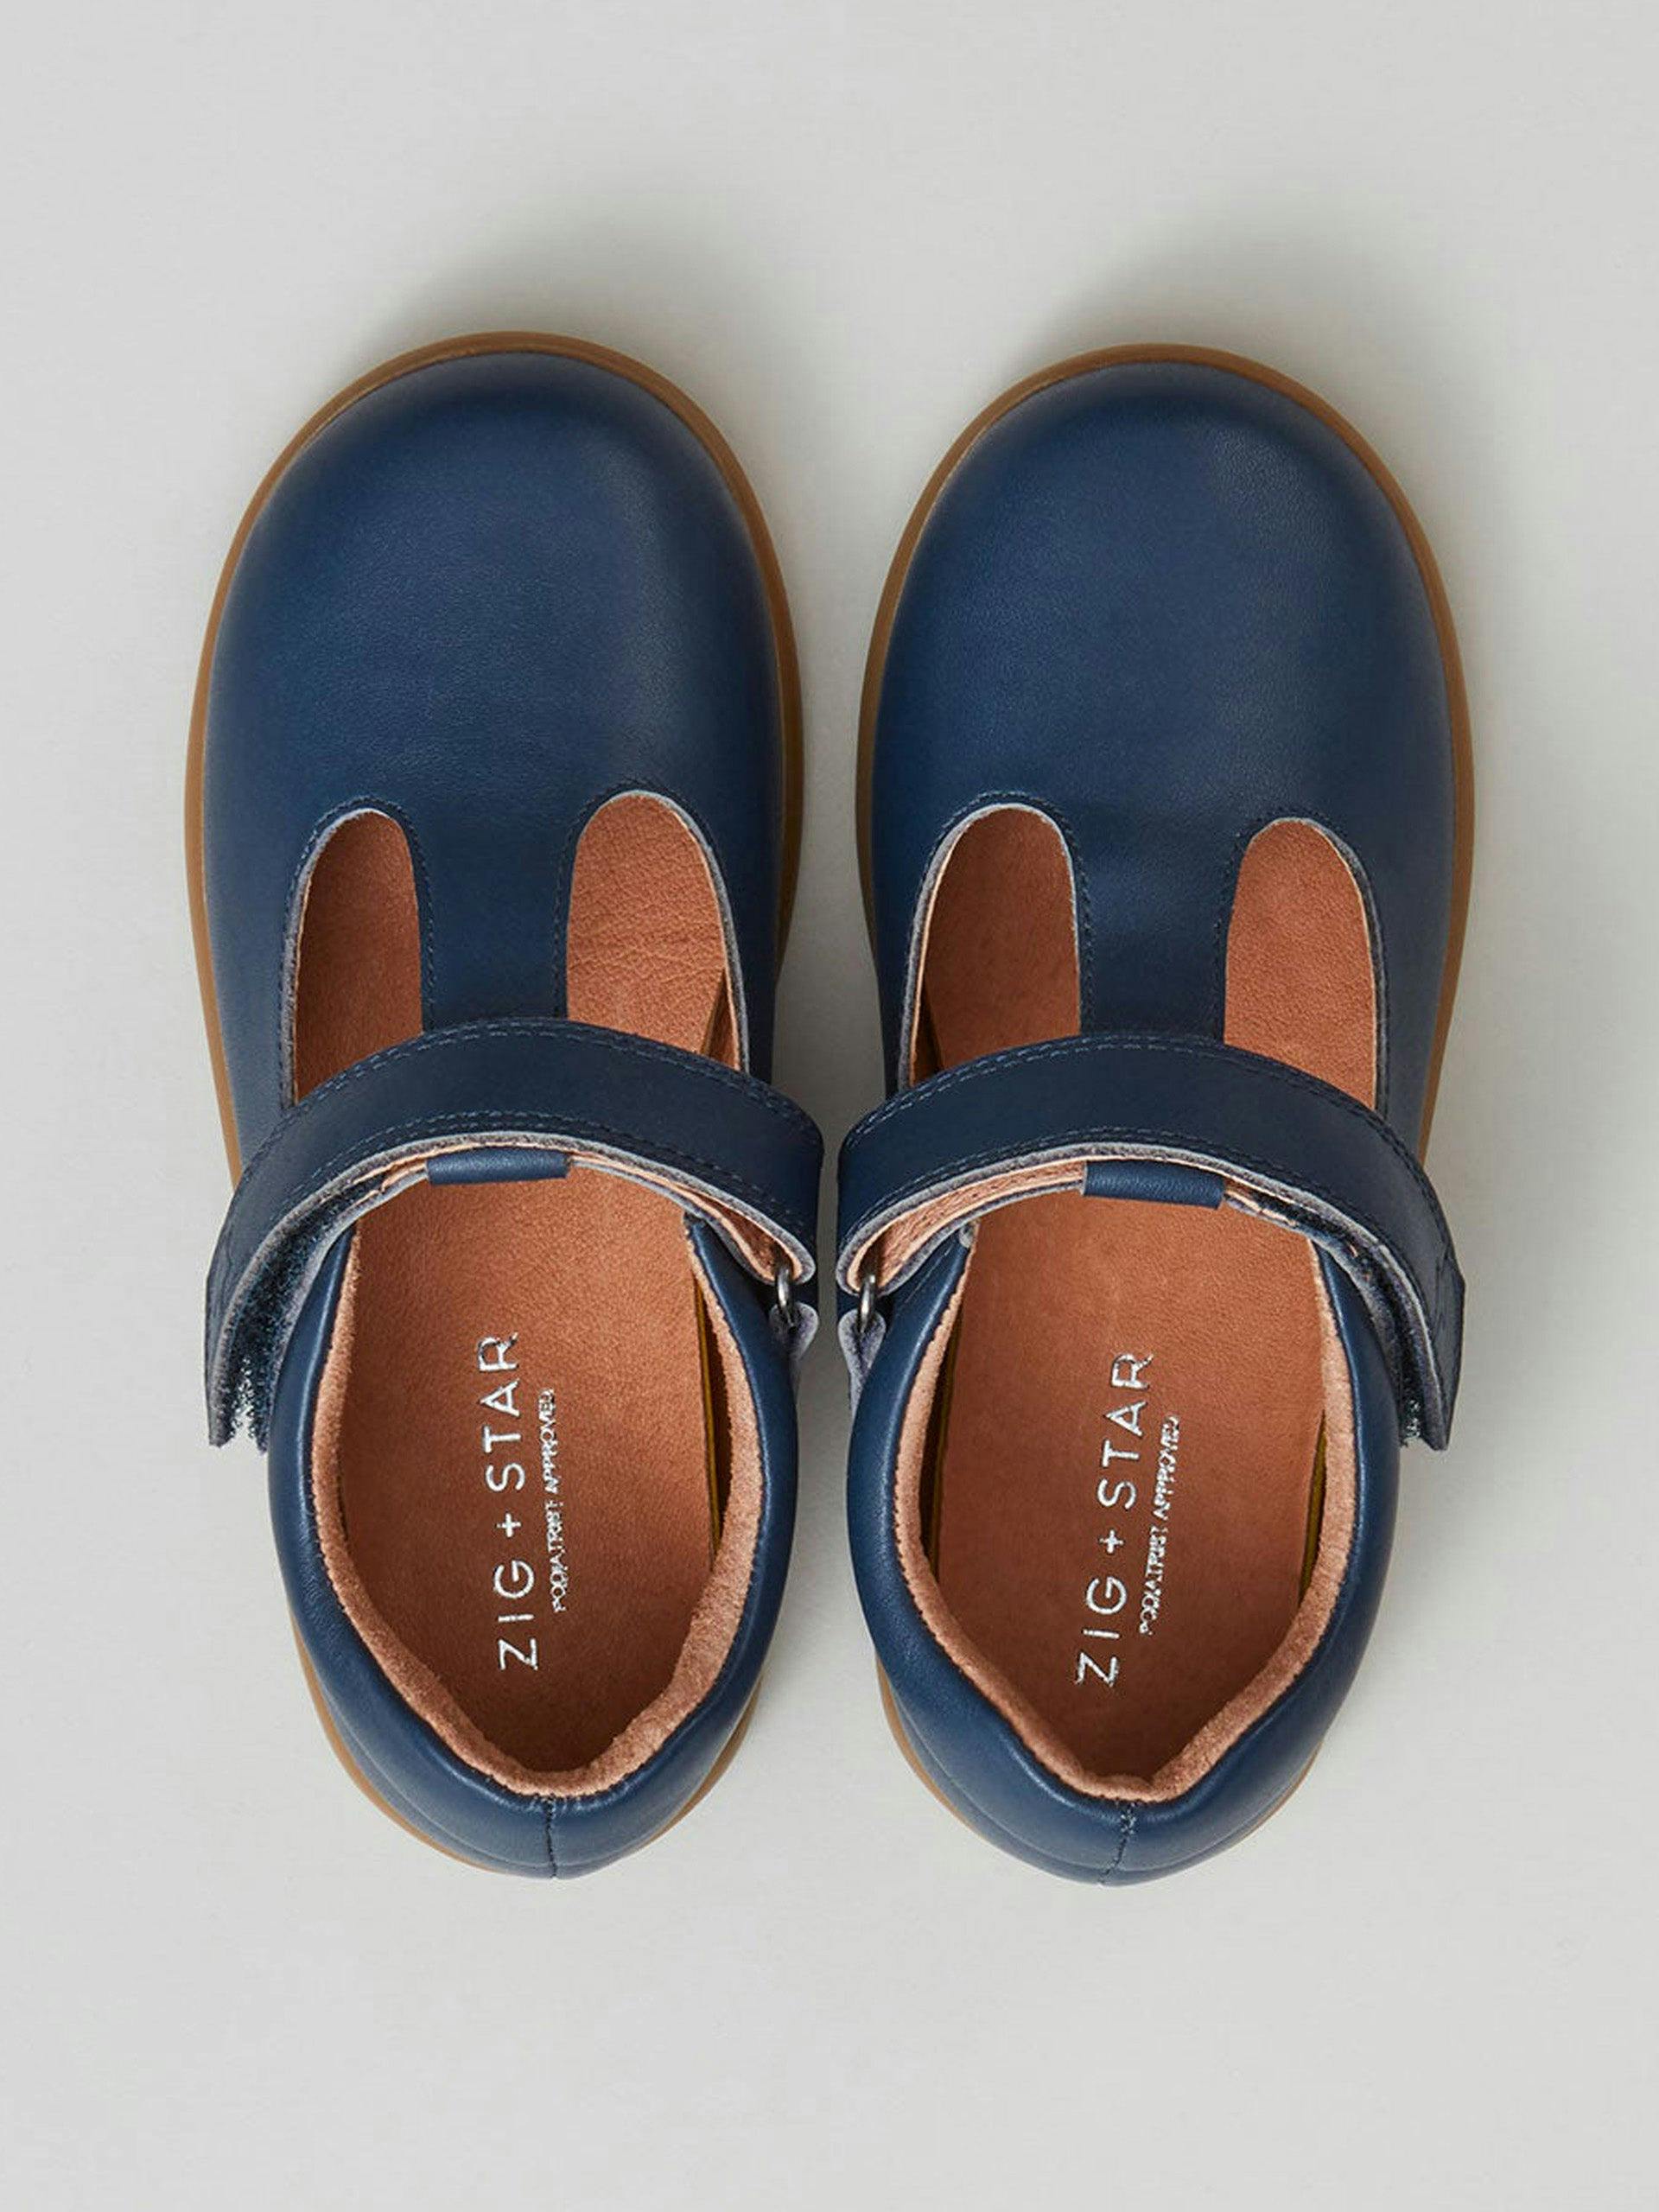 Navy strap shoes